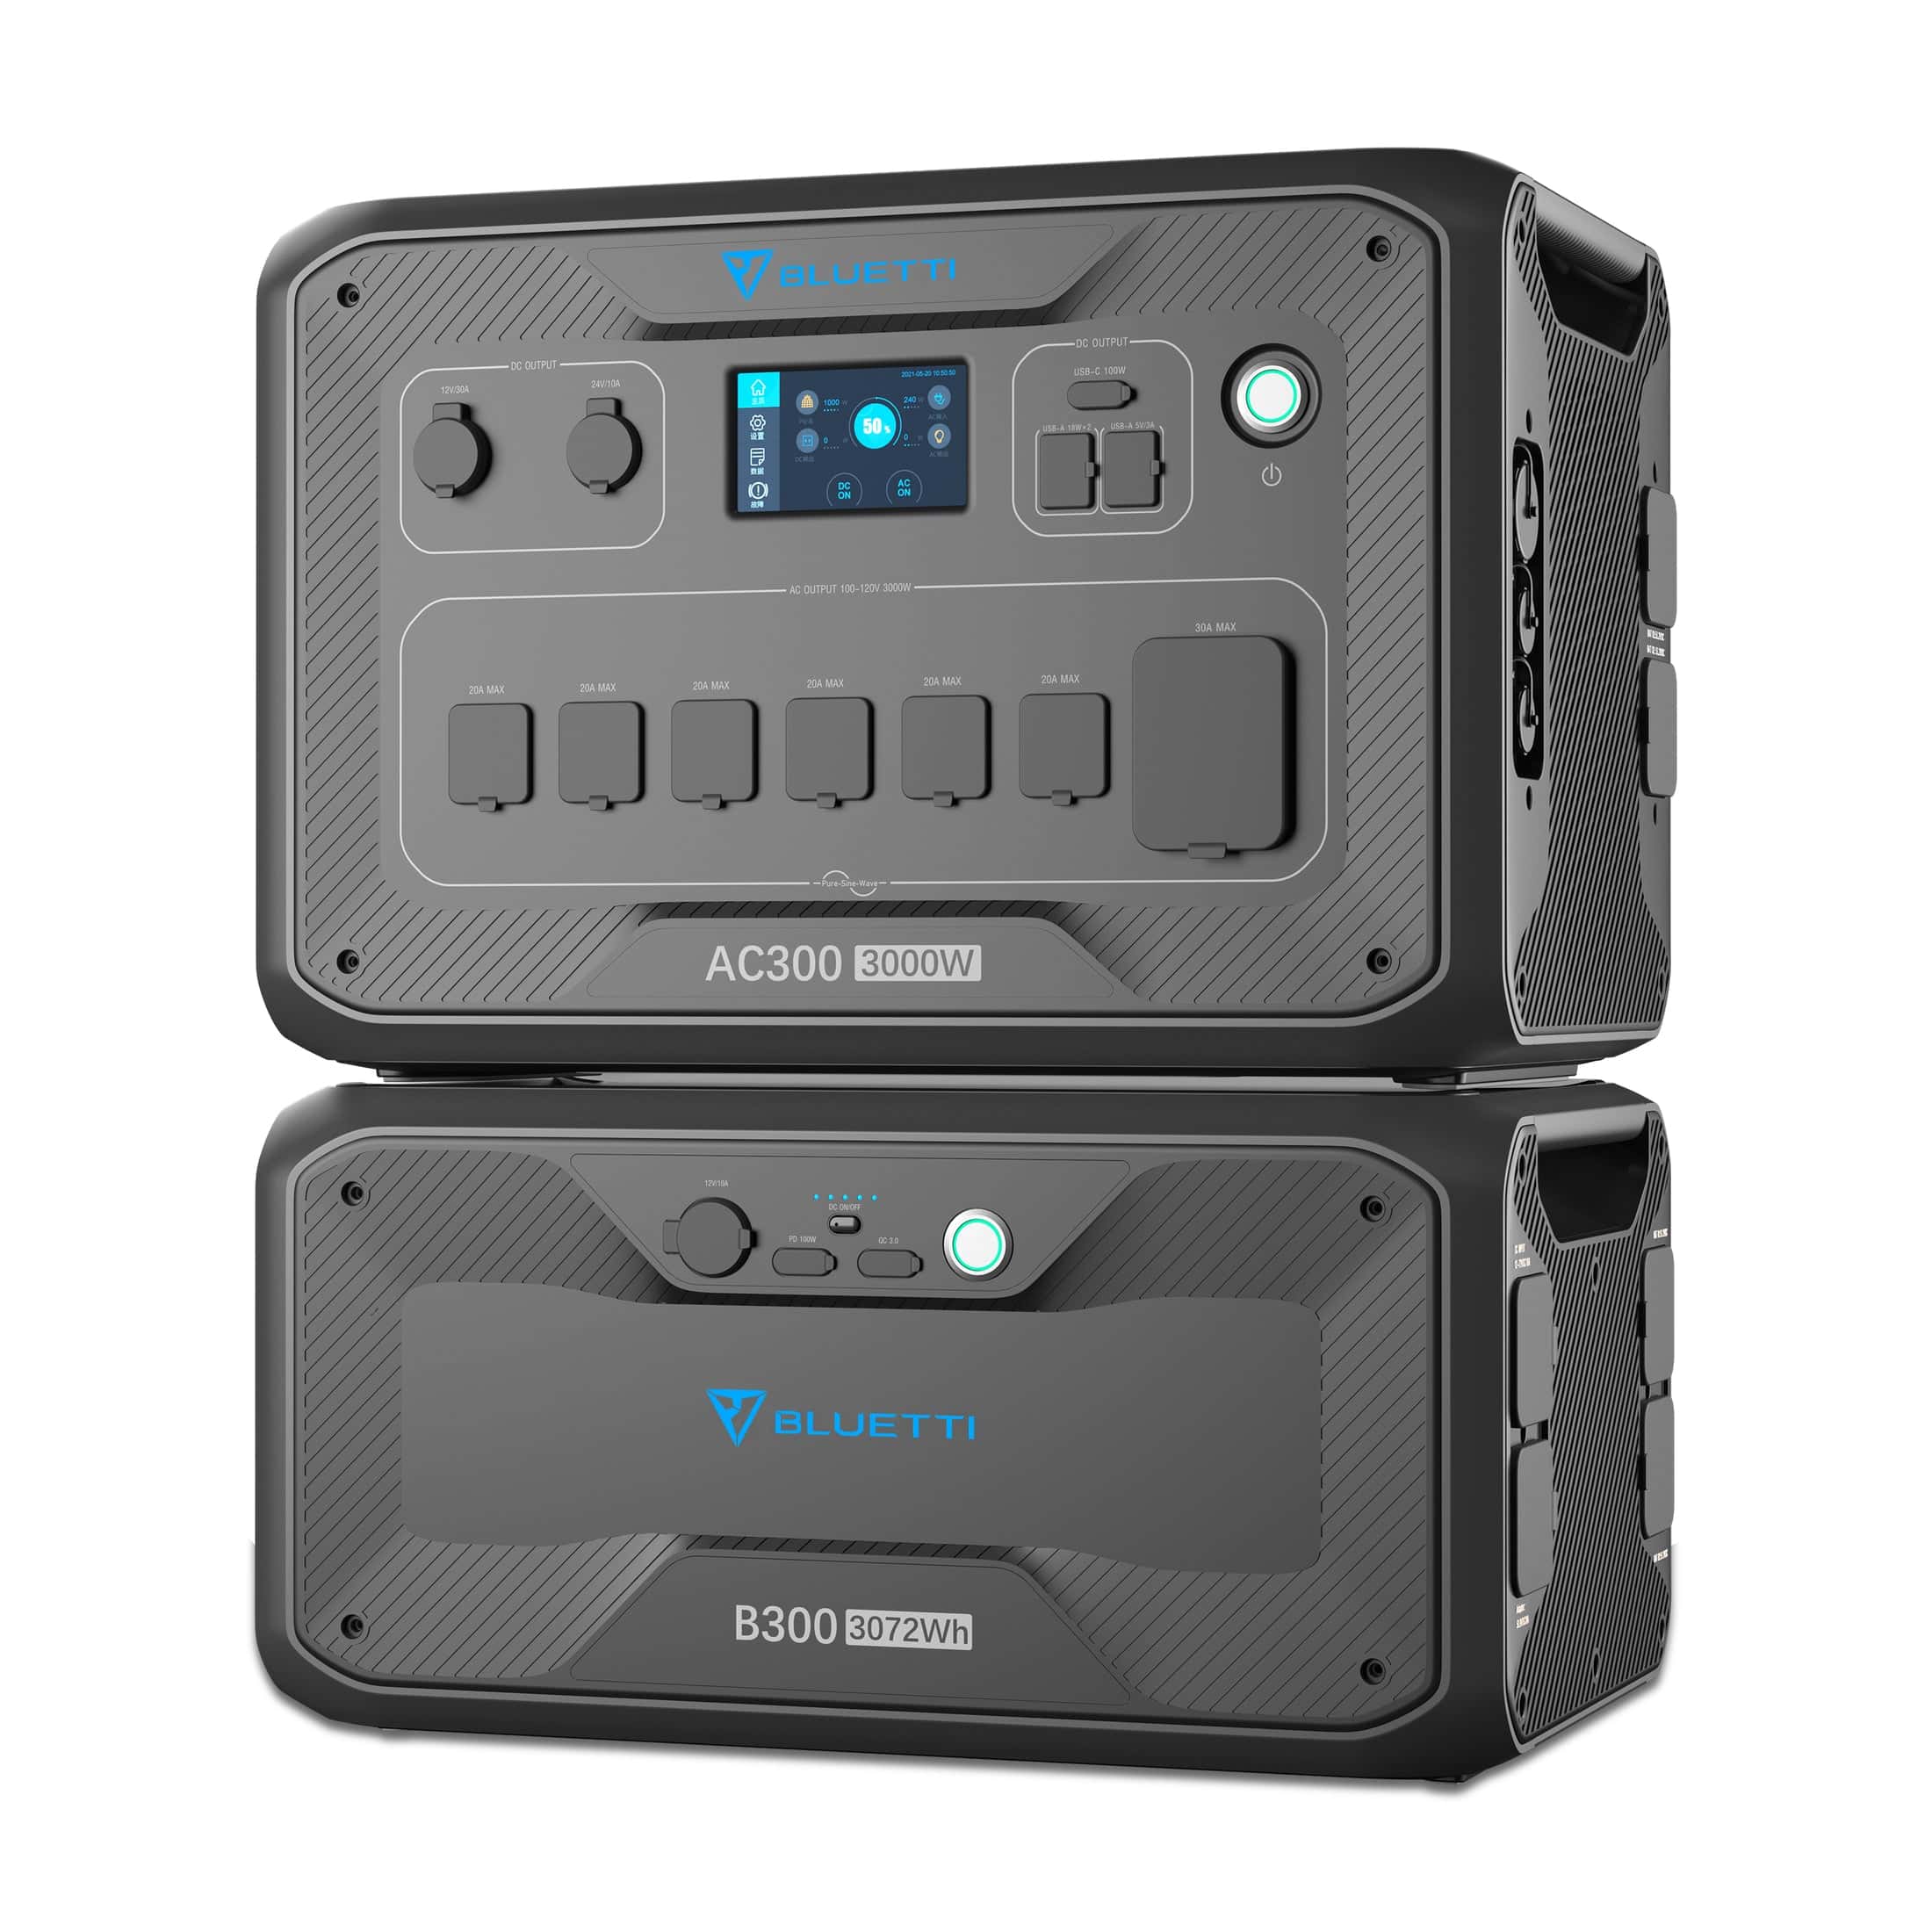 Bluetti's AC300 Power Station can be paired with up to four battery modules, providing whole-home power backup for days.